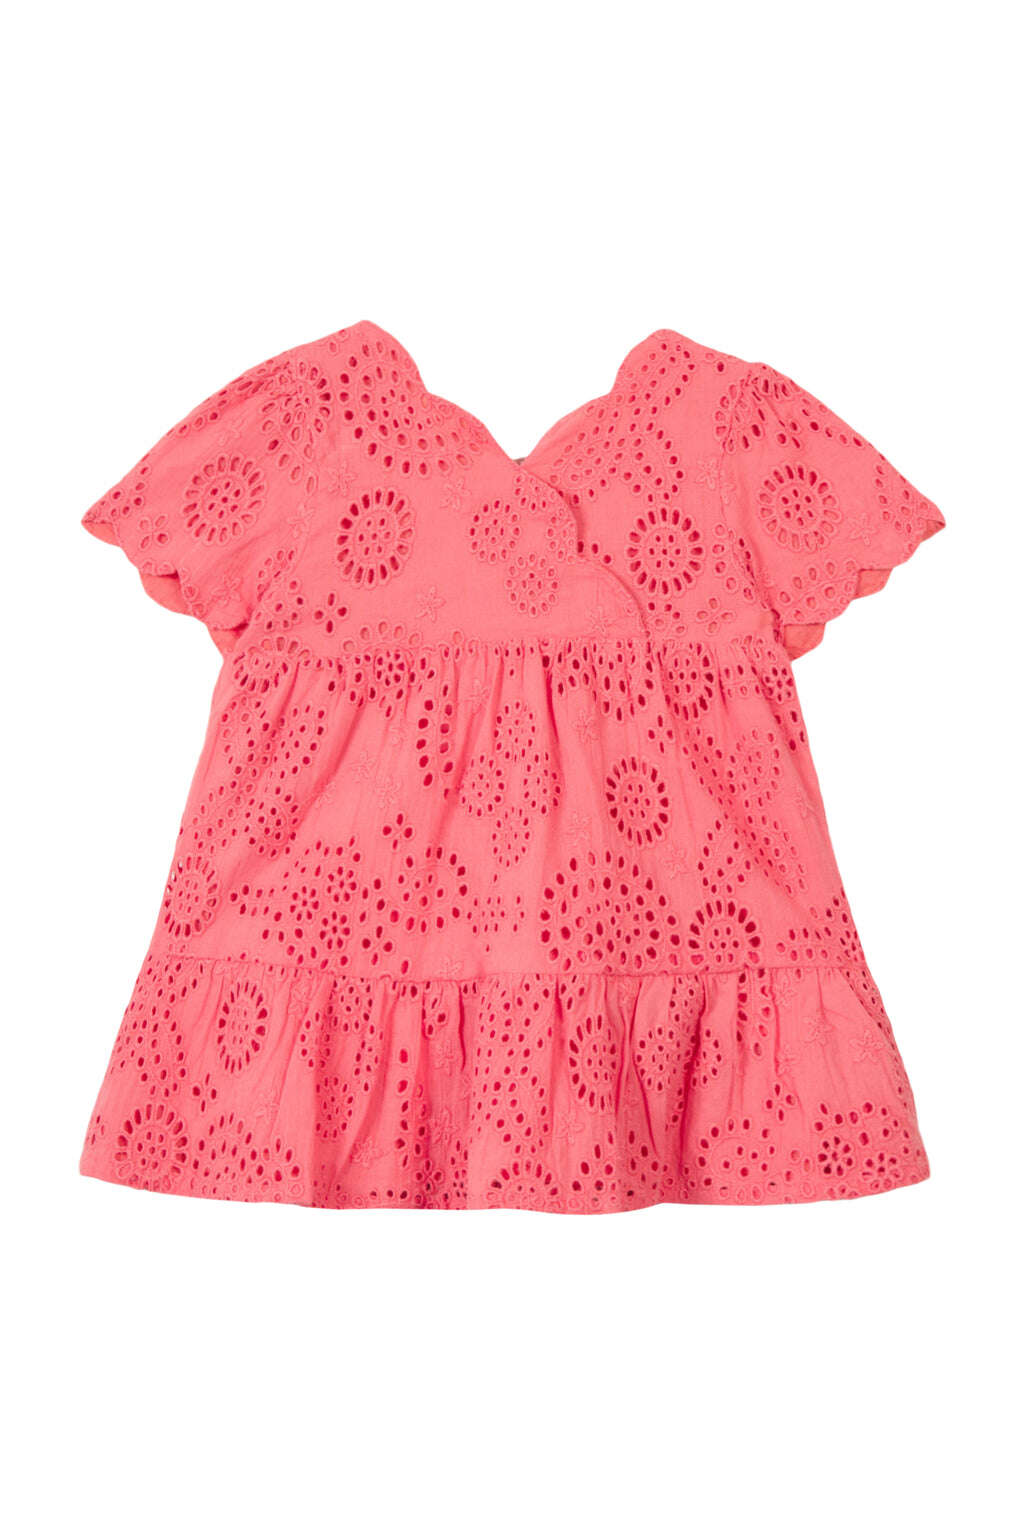 Robe - Coton rose broderies anglaises